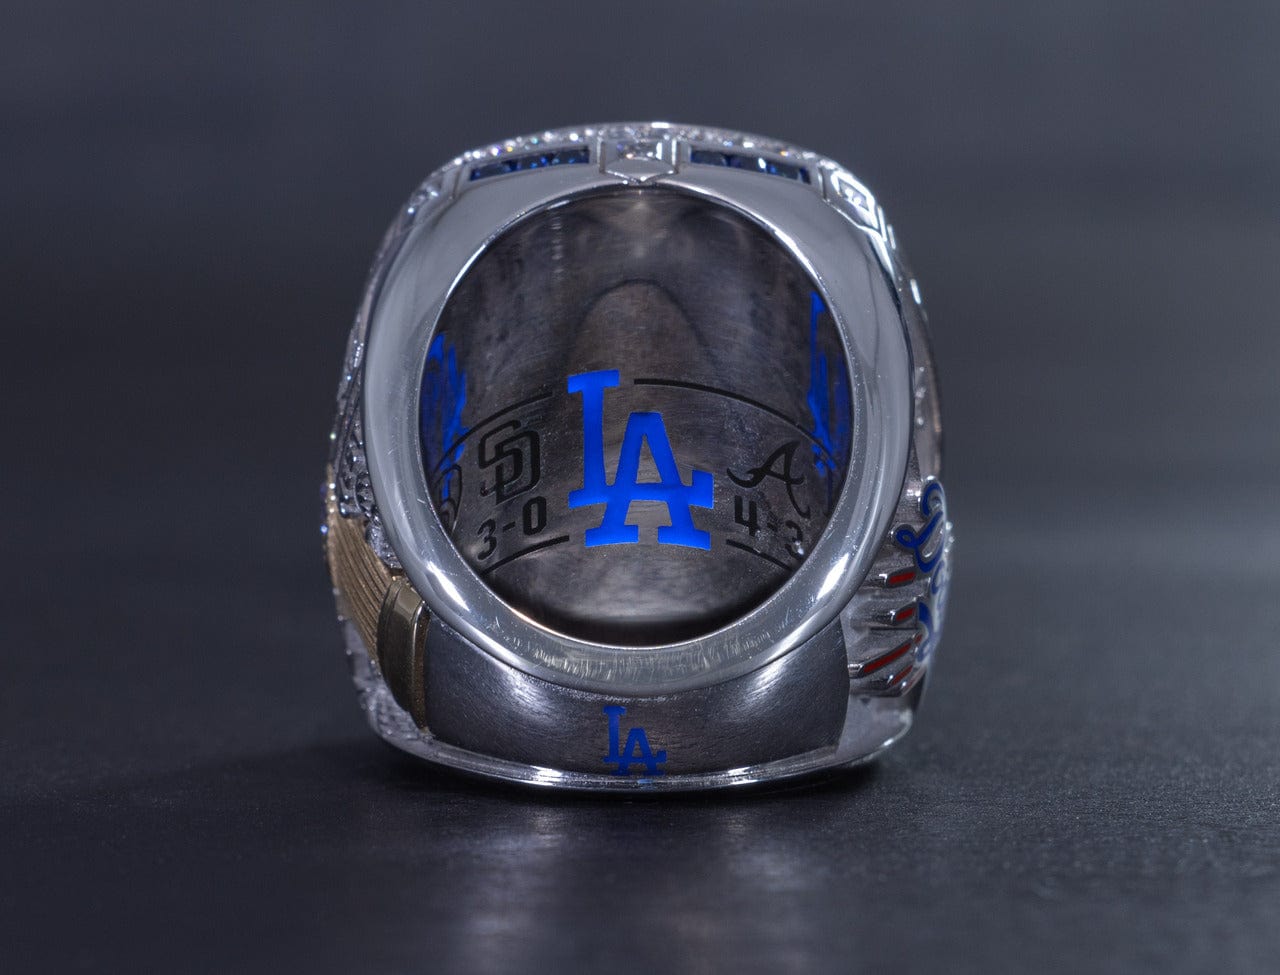 Dodgers receive 2020 World Series rings